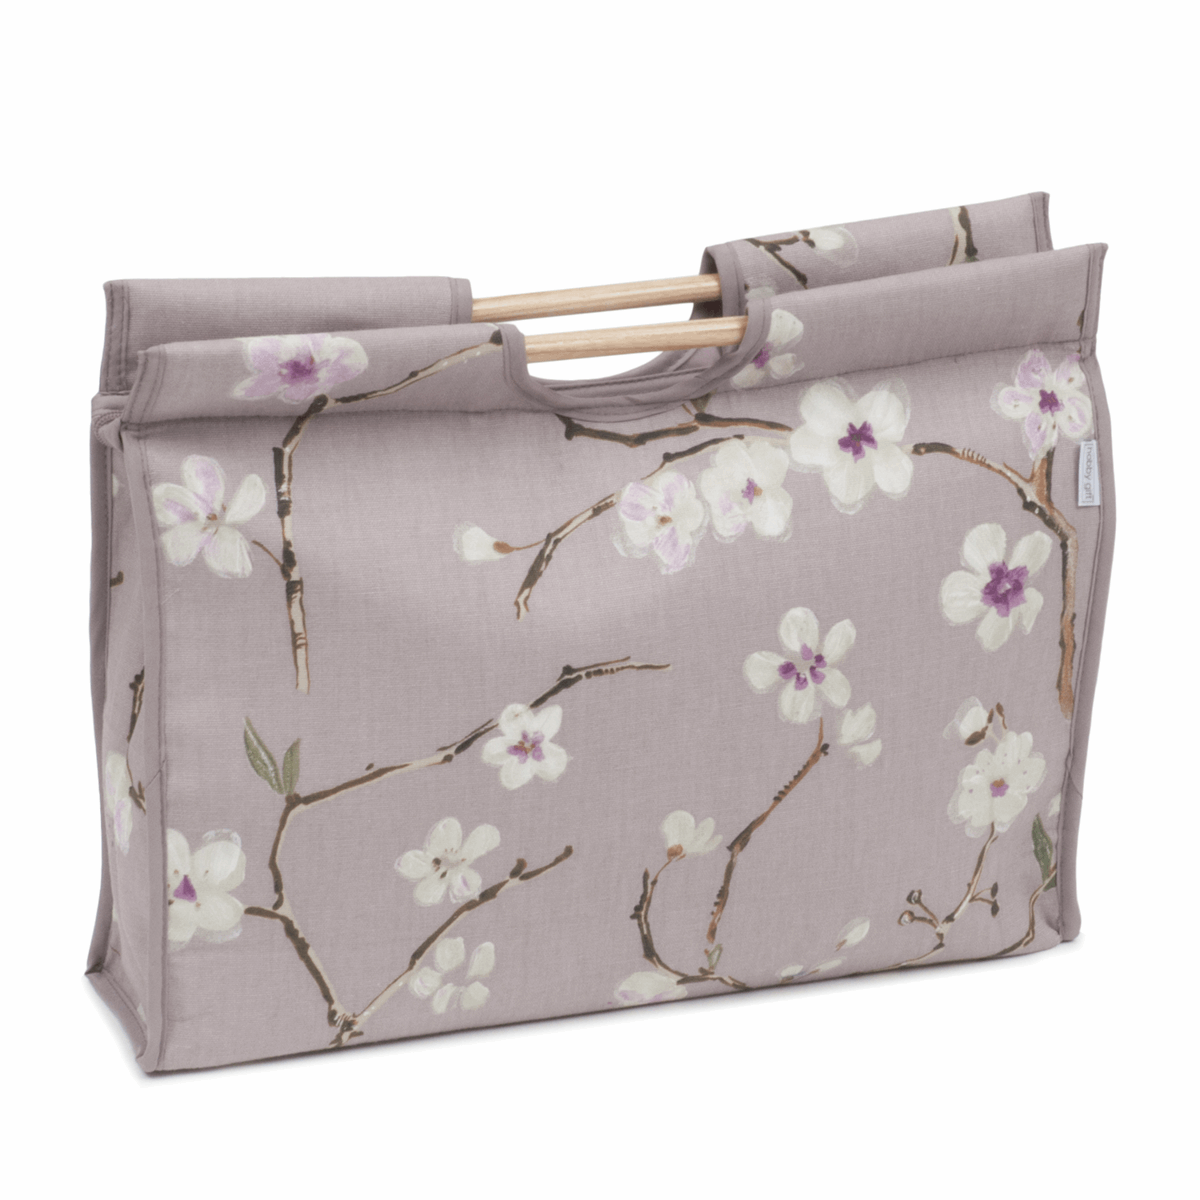 Craft Bag with Wooden Handles - Blossom